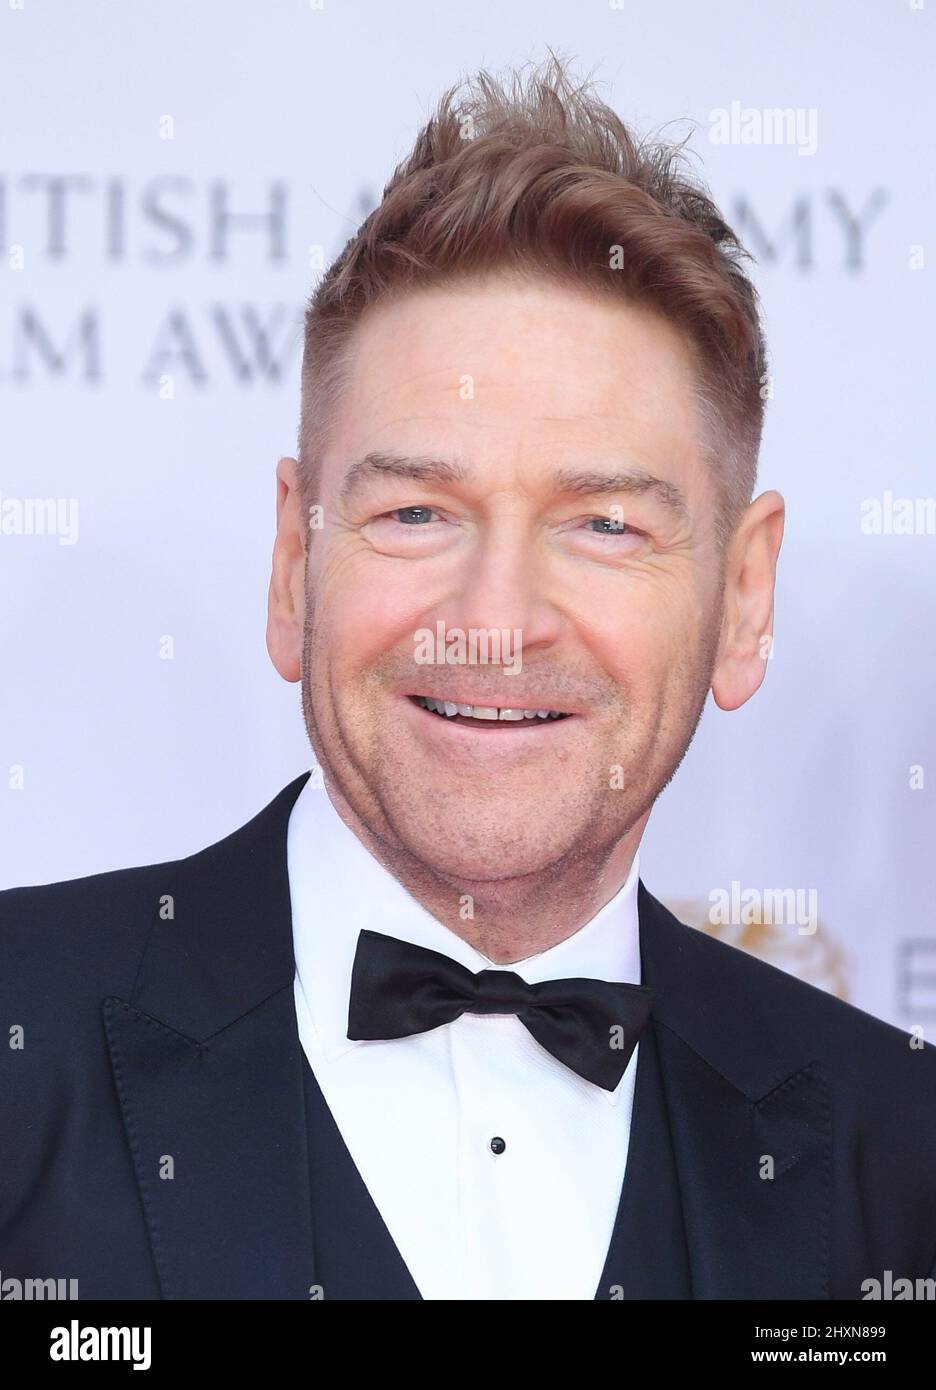 London, UK. 13th Mar, 2022. British actor/ director Kenneth Branagh attends the EE British Academy Film Awards at Royal Albert Hall, London on Sunday, March 13, 2022. Photo by Rune Hellestad/UPI Credit: UPI/Alamy Live News Stock Photo